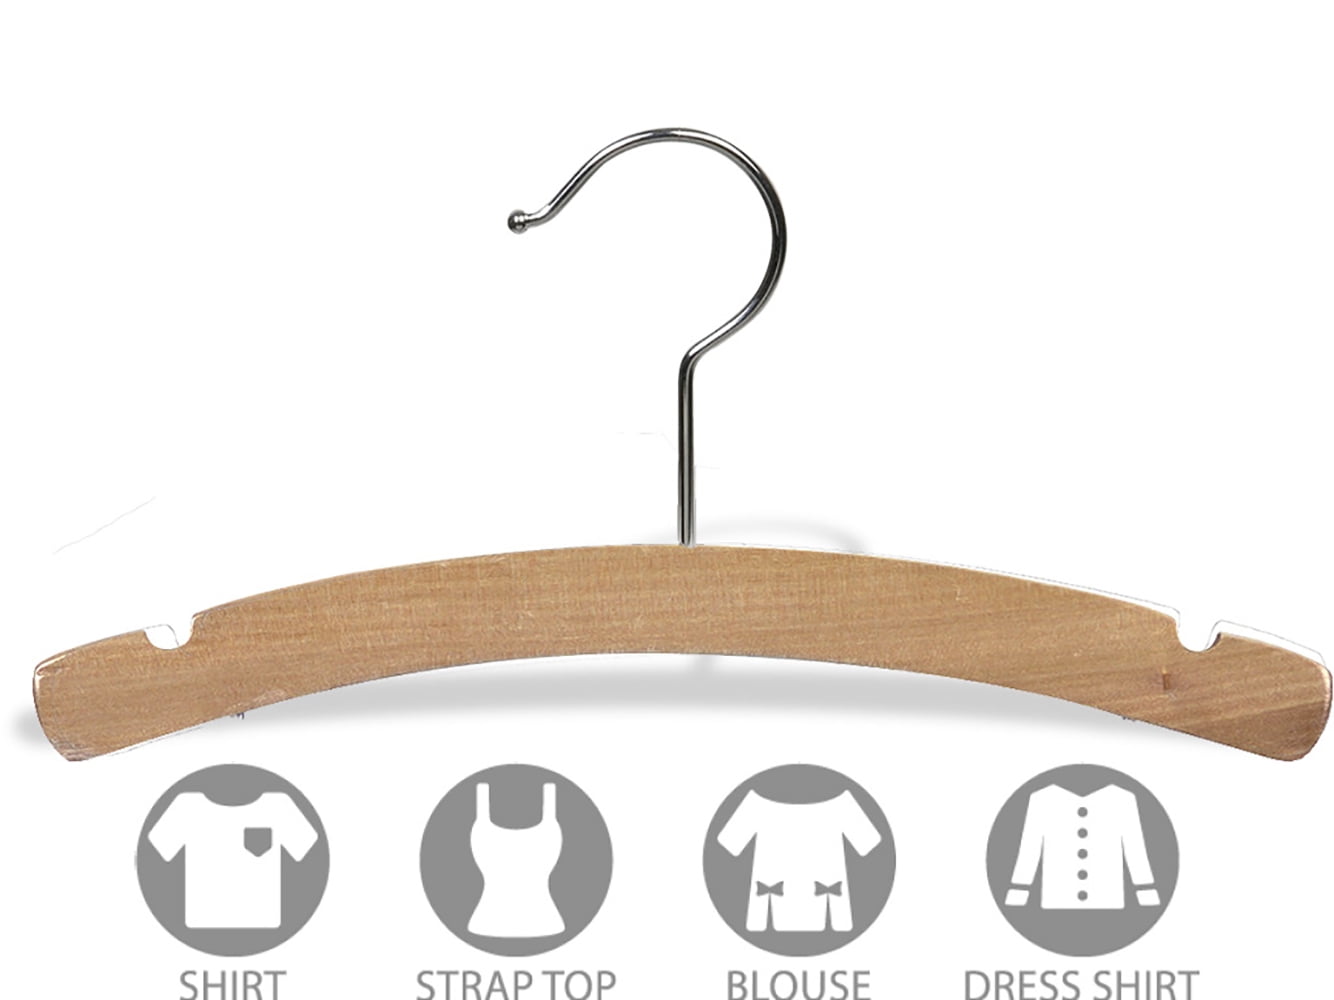  SONGMICS Kids Wooden Hangers 10 Pack, Solid Wood Baby Hangers,  Children's Coat Hangers with Pants Bar, Shoulder Notches, Swivel Hooks,  12.6 x 7.5 Inches, Natural and Silver UCRW006N10 : Home & Kitchen